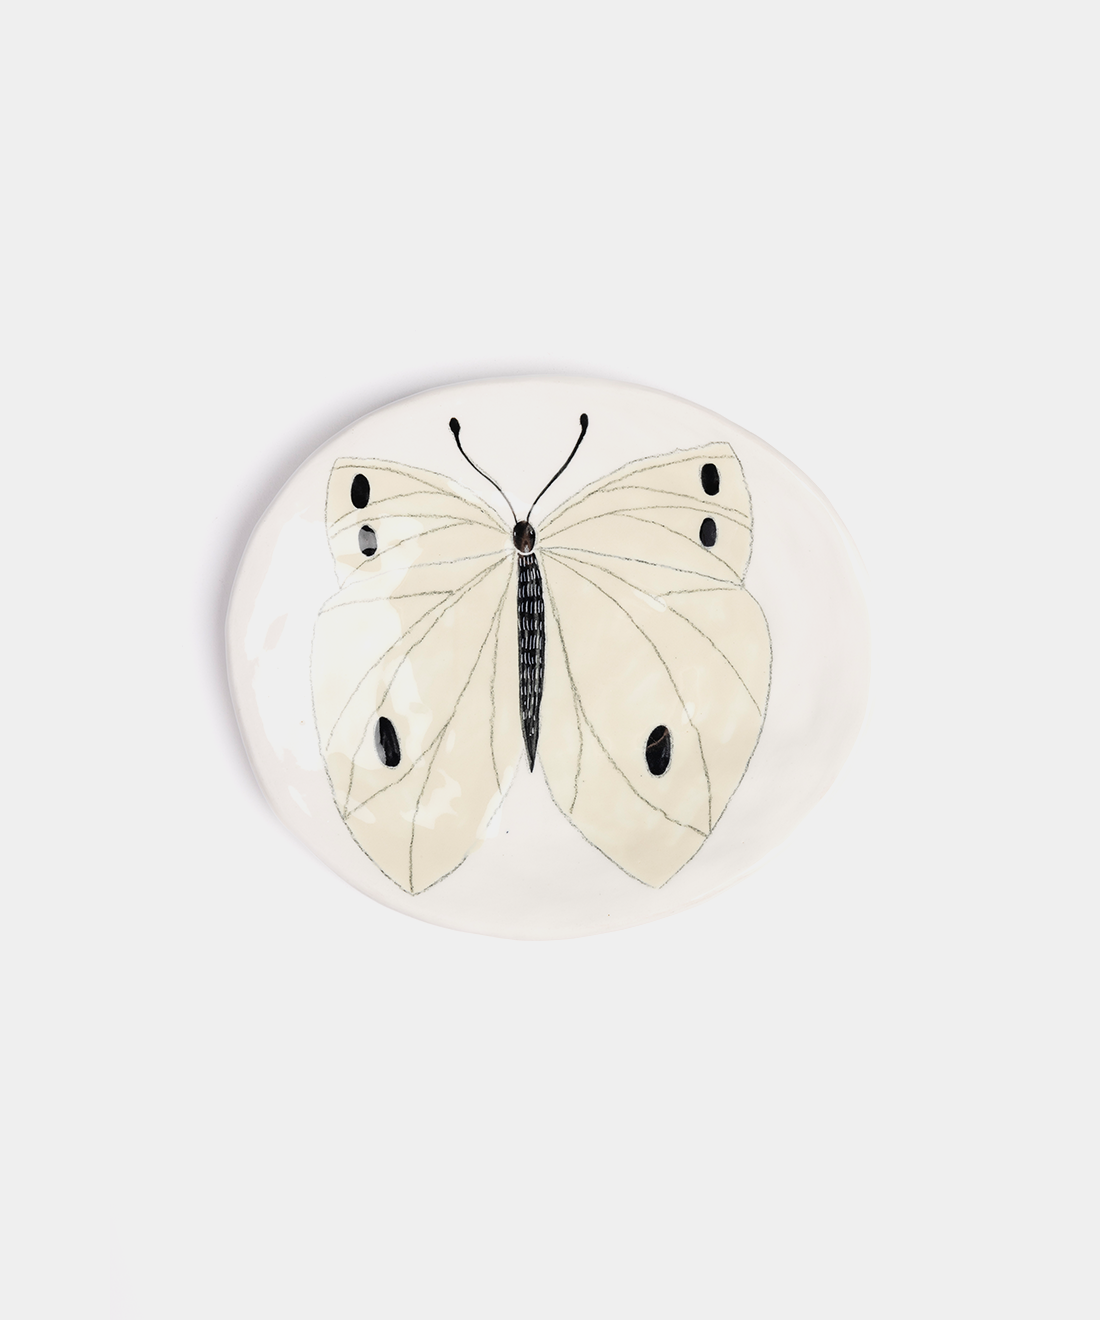 Small Butterfly Ceramic Plates, 7